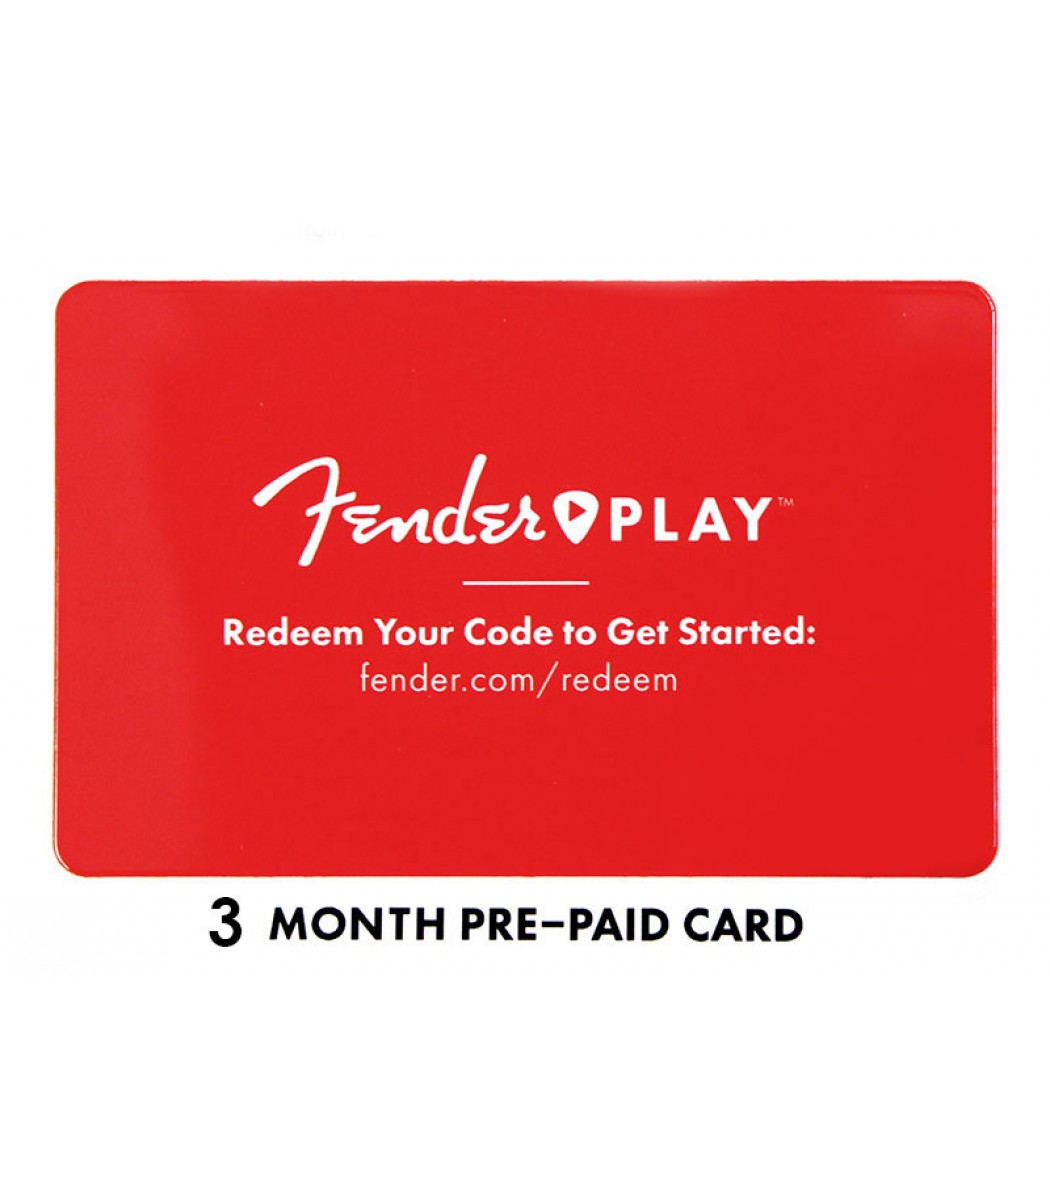 Update Fender Renews Offer Of 3 Free Months To Fender Play